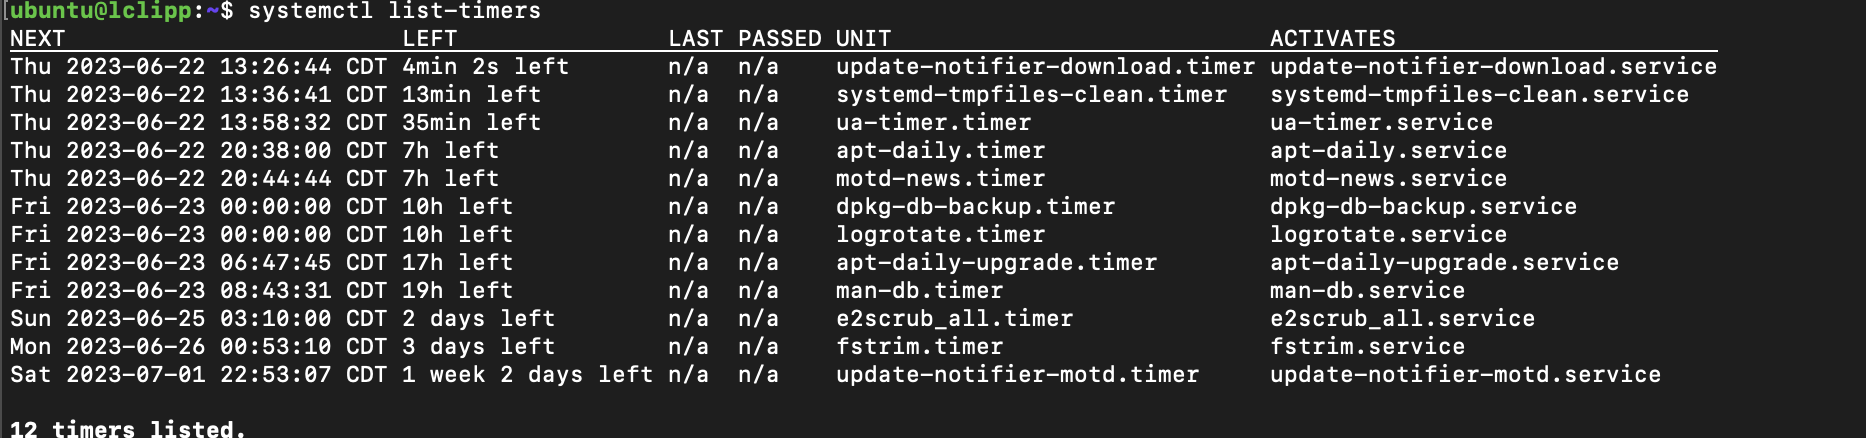 systemctl list-timers command output terminal